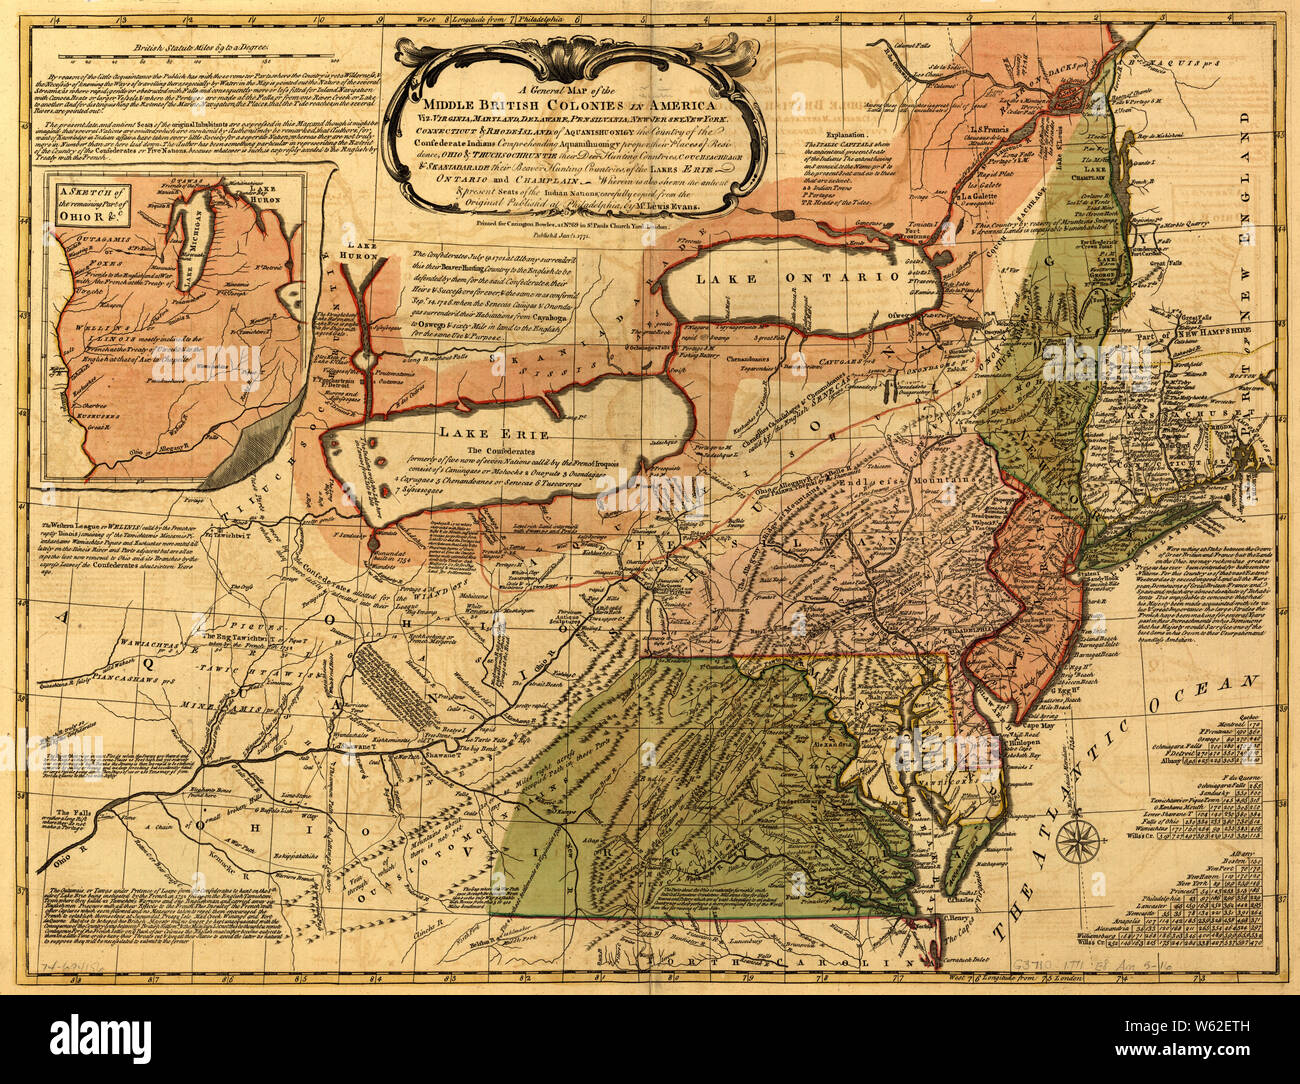 American Revolutionary War Era Maps 1750-1786 042 A general map of the middle British colonies in America 12 Rebuild and Repair Stock Photo